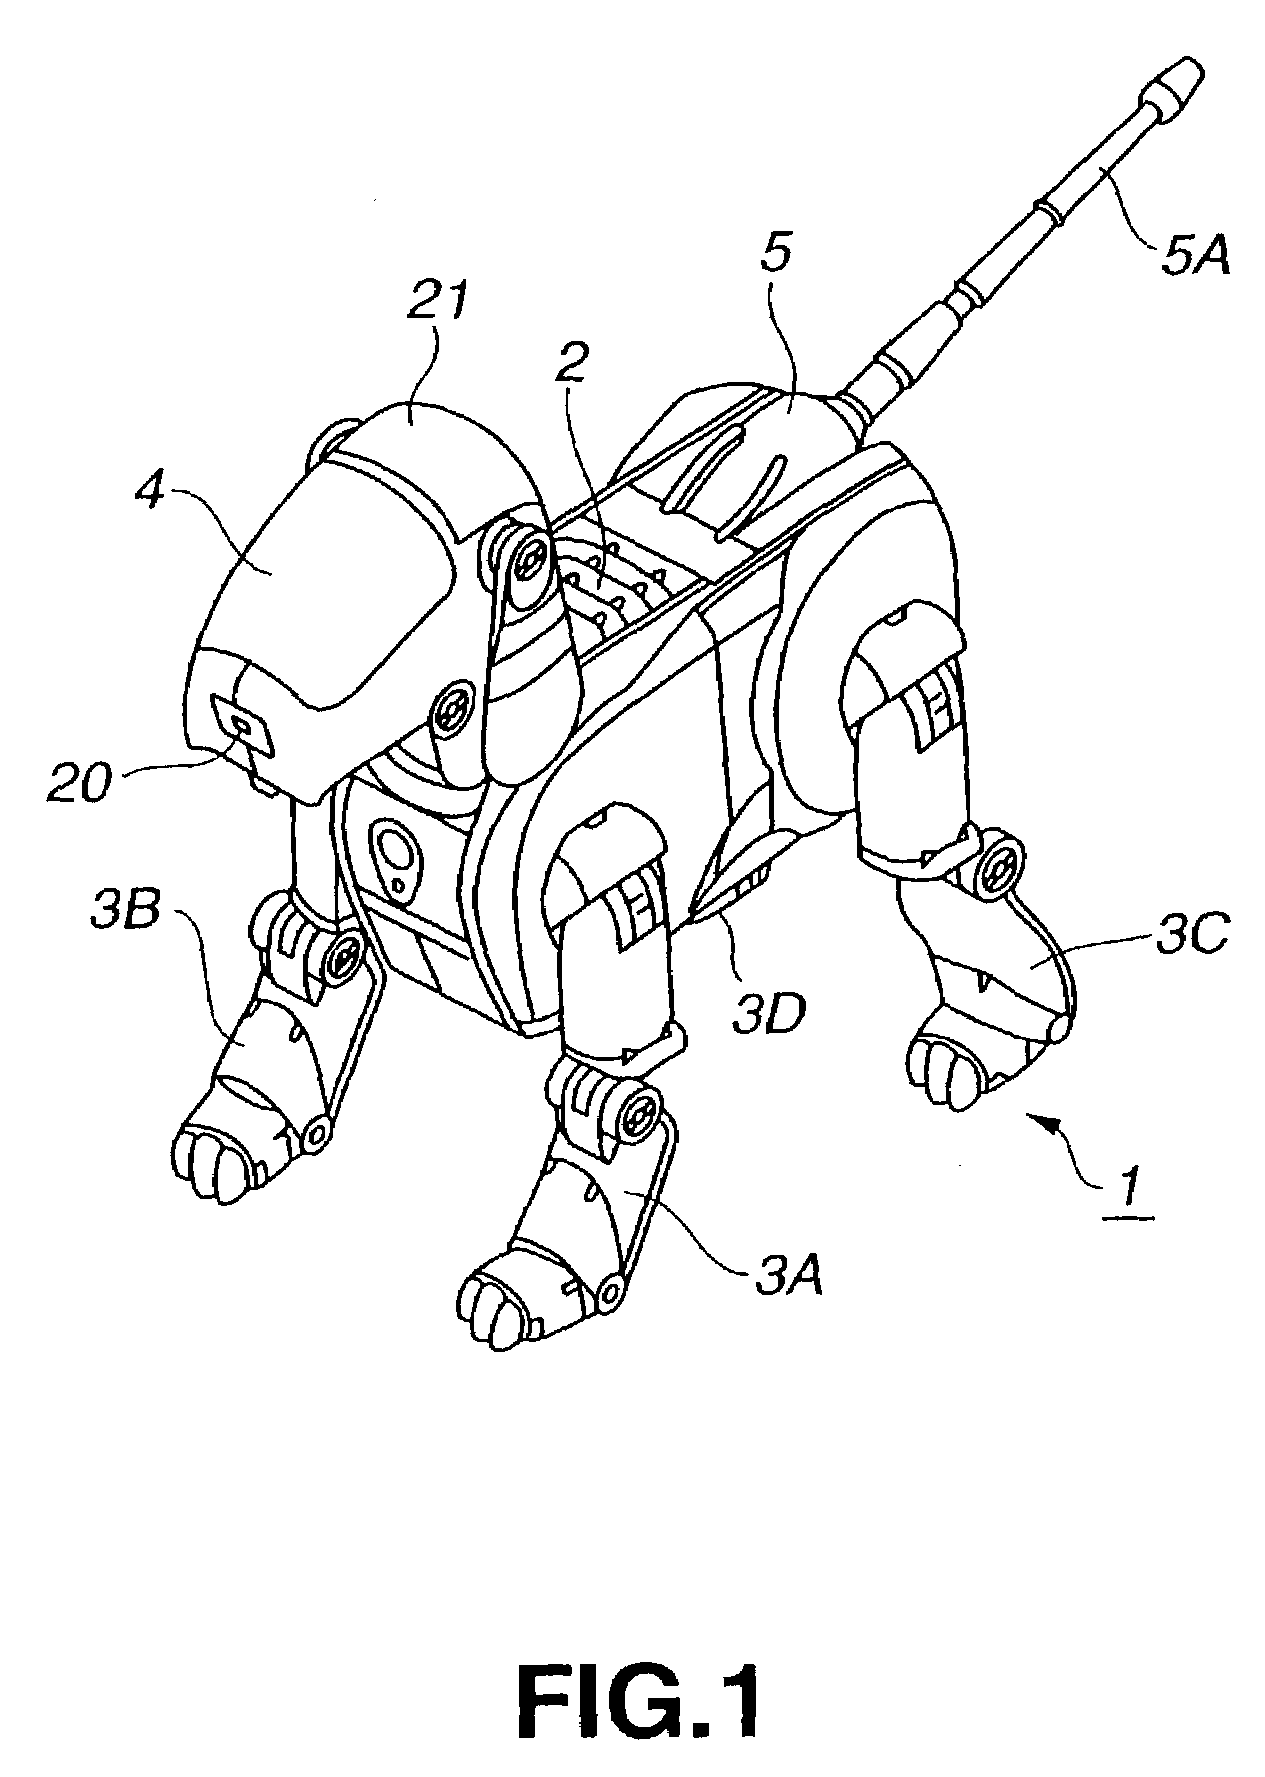 Robot apparatus, method and device for recognition of letters or characters, control program and recording medium